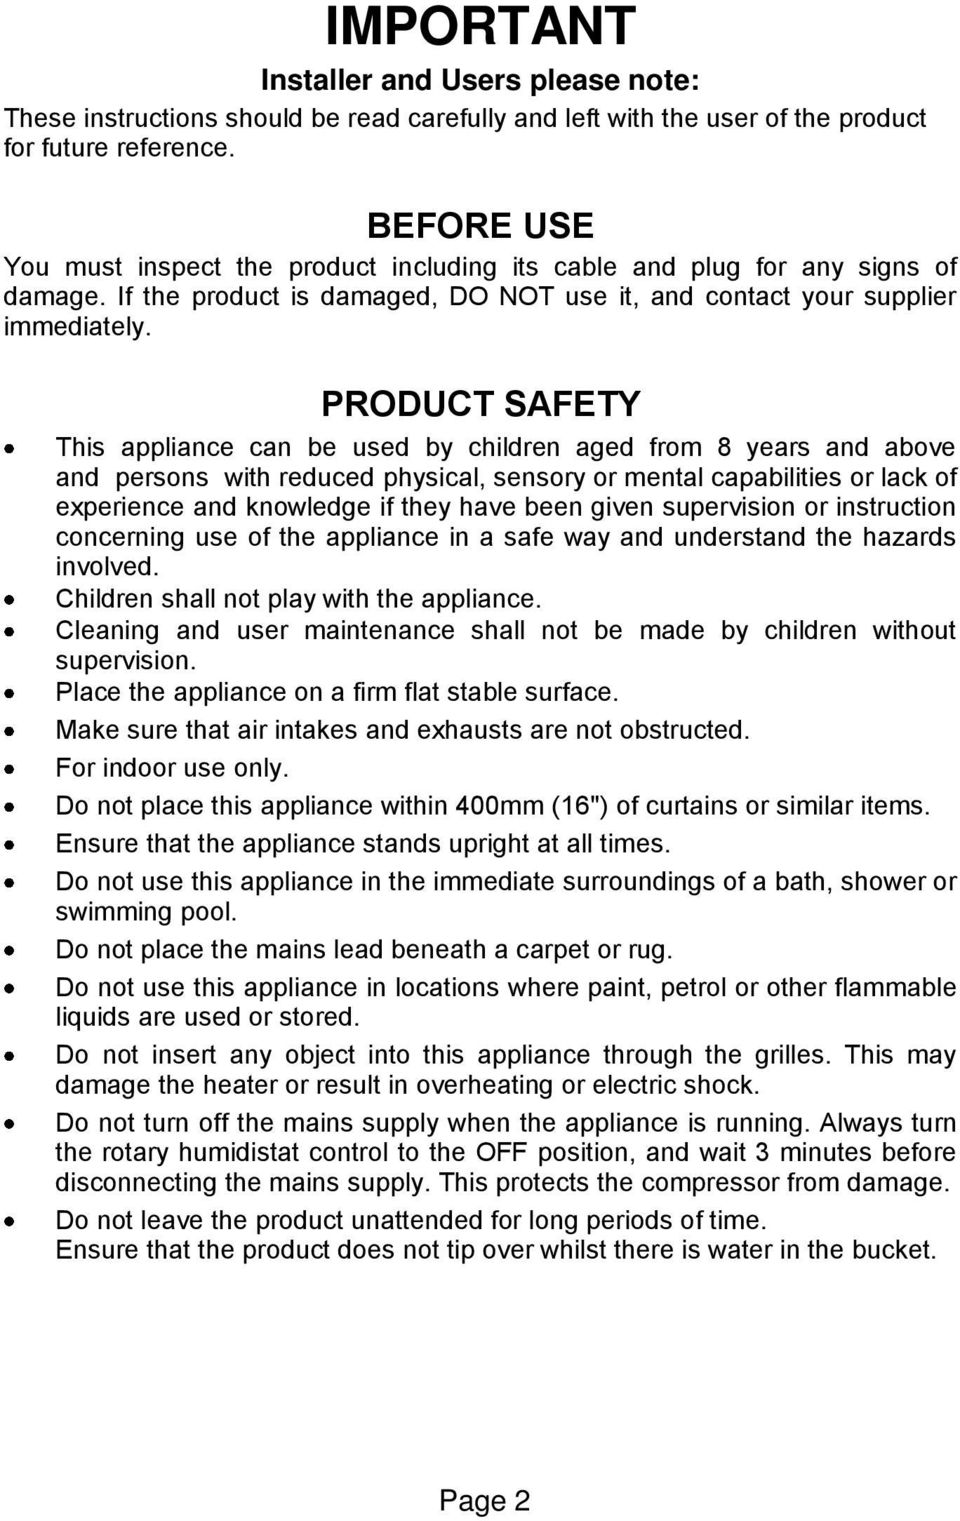 PRODUCT SAFETY This appliance can be used by children aged from 8 years and above and persons with reduced physical, sensory or mental capabilities or lack of experience and knowledge if they have